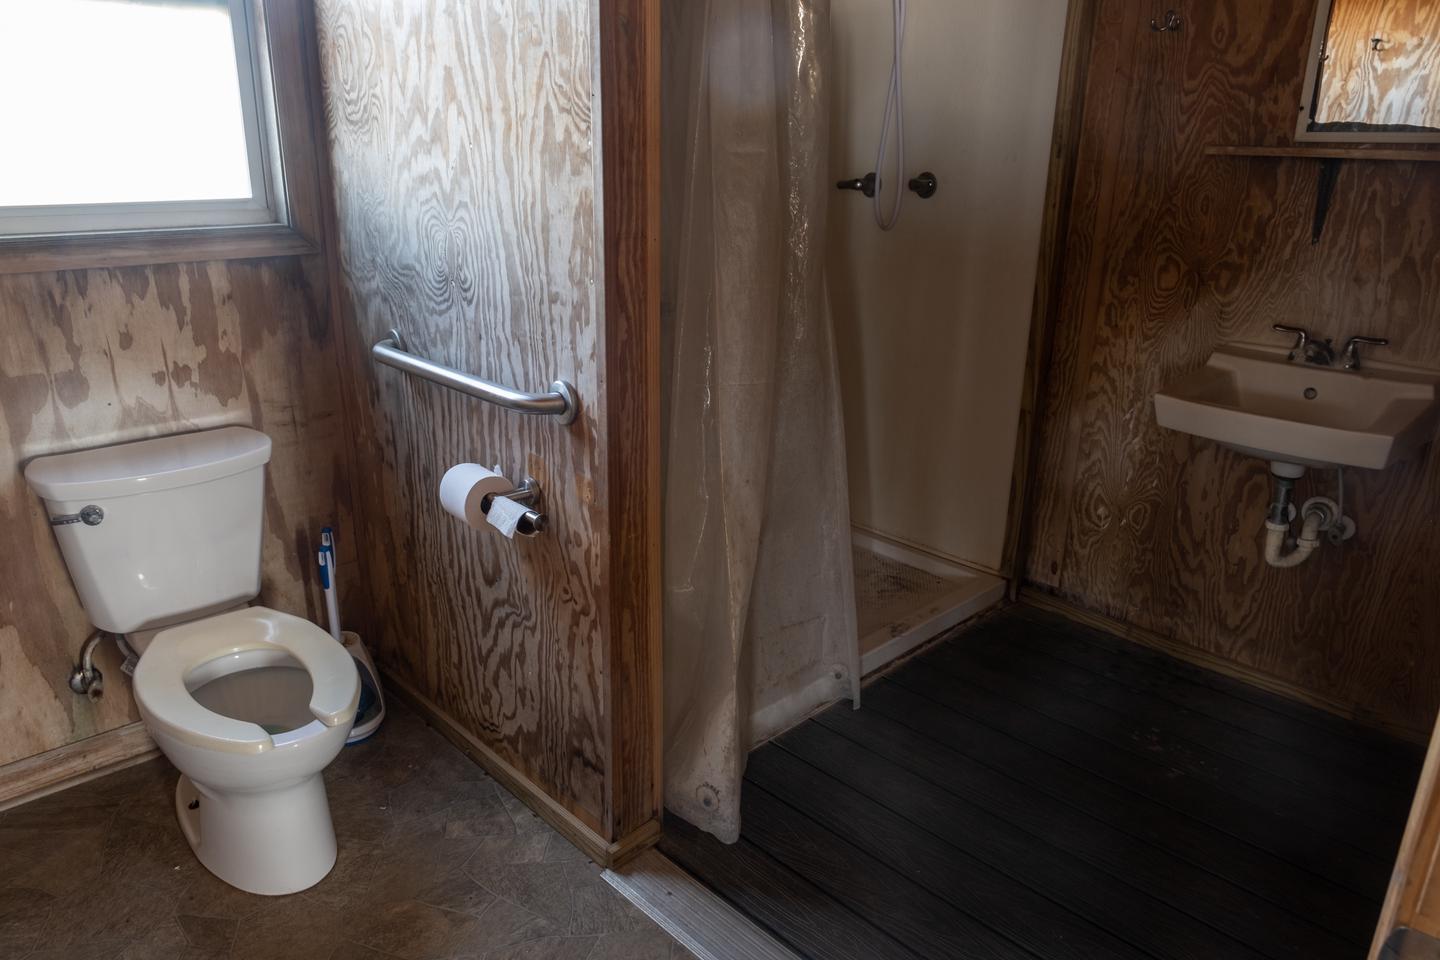 View of the accessible bathroom, showing toilet, shower, and sink.Accessible bathroom.